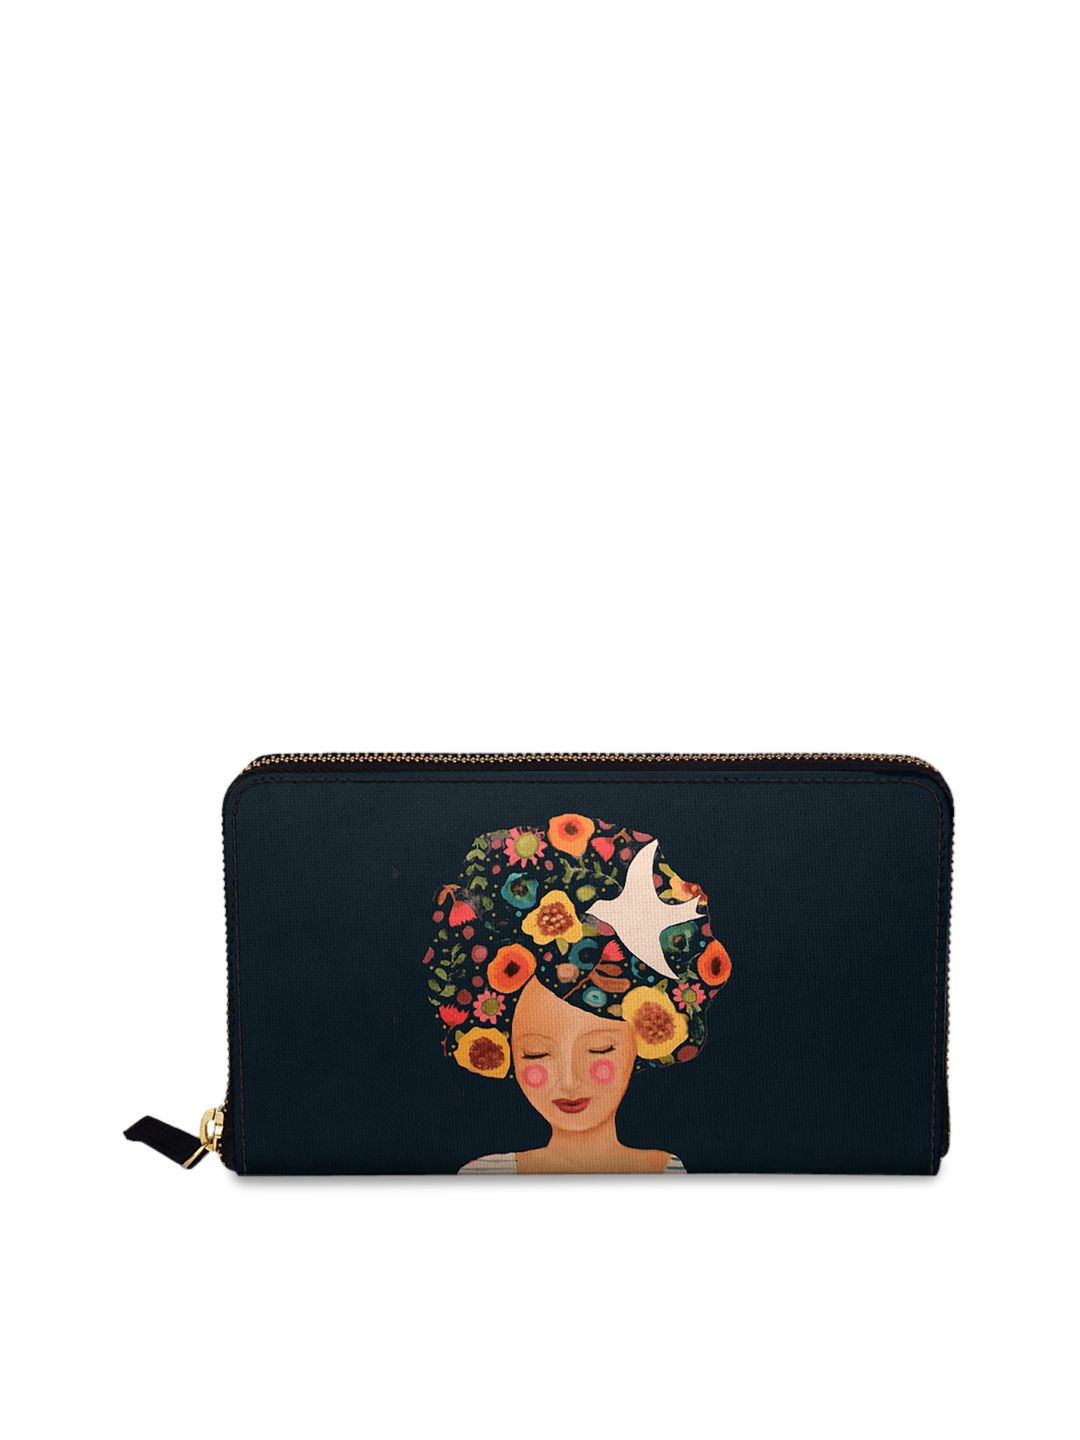 DailyObjects Navy Blue Printed Zip Around Wallet Price in India